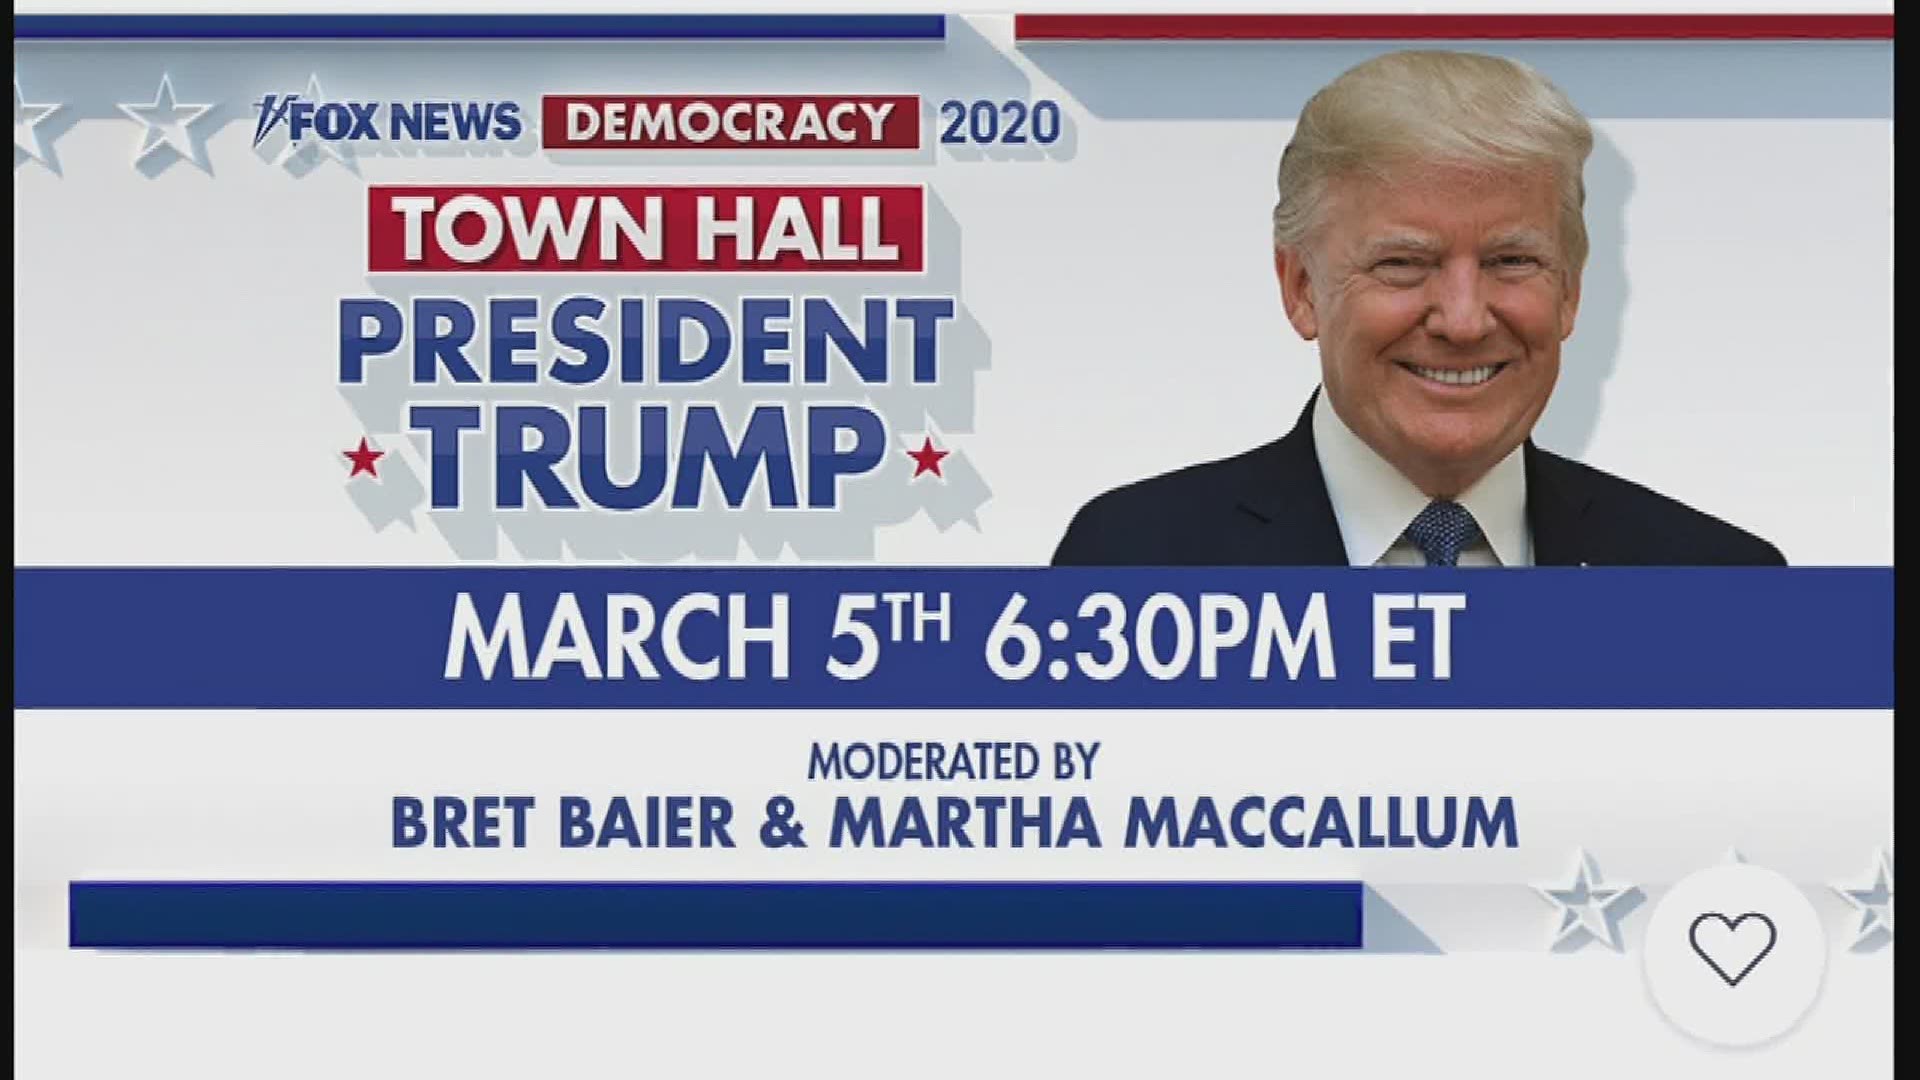 President Donald Trump is coming to Scranton on Thursday to take part in a televised town hall meeting being broadcast by the Fox News Channel.